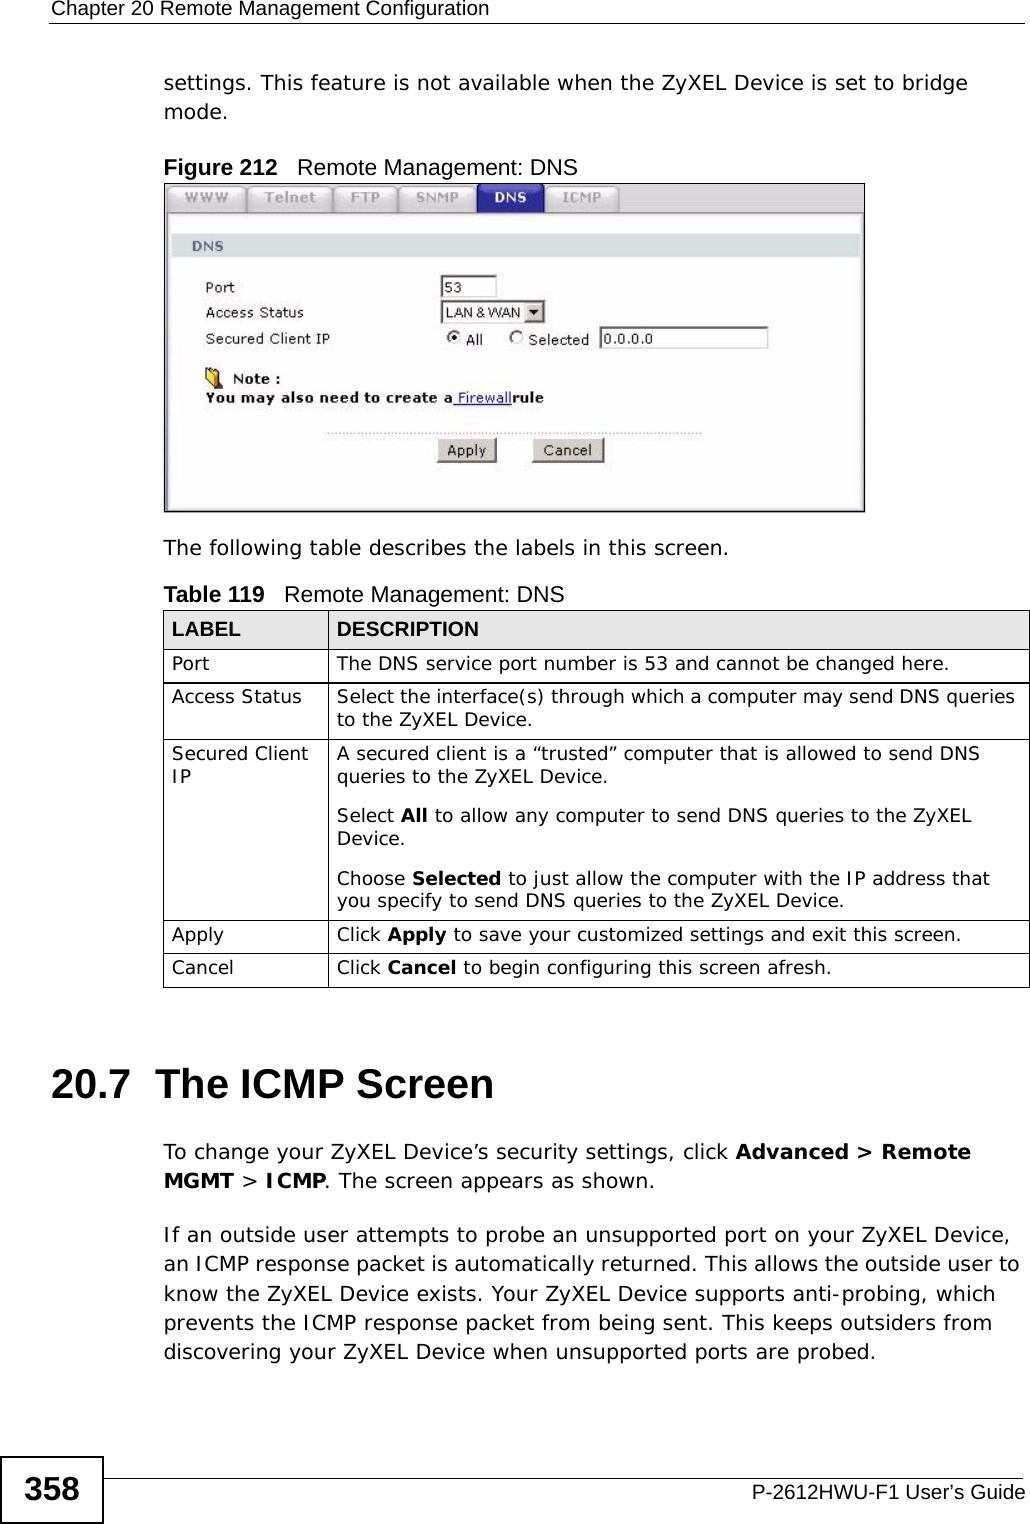 Chapter 20 Remote Management ConfigurationP-2612HWU-F1 User’s Guide358settings. This feature is not available when the ZyXEL Device is set to bridge mode.Figure 212   Remote Management: DNSThe following table describes the labels in this screen.20.7  The ICMP ScreenTo change your ZyXEL Device’s security settings, click Advanced &gt; Remote MGMT &gt; ICMP. The screen appears as shown.If an outside user attempts to probe an unsupported port on your ZyXEL Device, an ICMP response packet is automatically returned. This allows the outside user to know the ZyXEL Device exists. Your ZyXEL Device supports anti-probing, which prevents the ICMP response packet from being sent. This keeps outsiders from discovering your ZyXEL Device when unsupported ports are probed. Table 119   Remote Management: DNSLABEL DESCRIPTIONPort The DNS service port number is 53 and cannot be changed here.Access Status Select the interface(s) through which a computer may send DNS queries to the ZyXEL Device.Secured Client IP A secured client is a “trusted” computer that is allowed to send DNS queries to the ZyXEL Device.Select All to allow any computer to send DNS queries to the ZyXEL Device.Choose Selected to just allow the computer with the IP address that you specify to send DNS queries to the ZyXEL Device.Apply Click Apply to save your customized settings and exit this screen. Cancel Click Cancel to begin configuring this screen afresh.